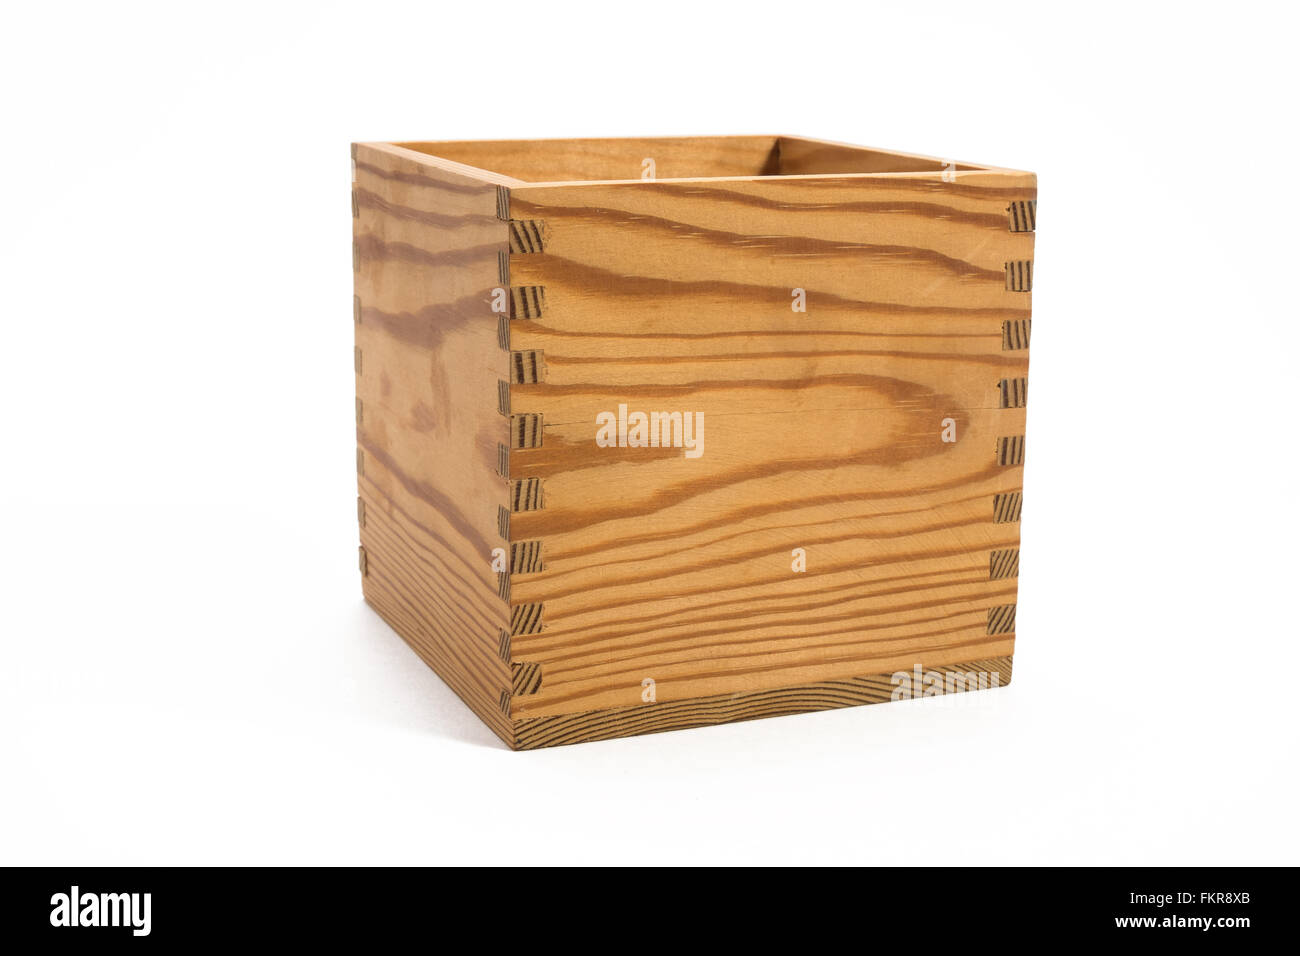 wood box standing on white surface, the opening is facing up Stock Photo